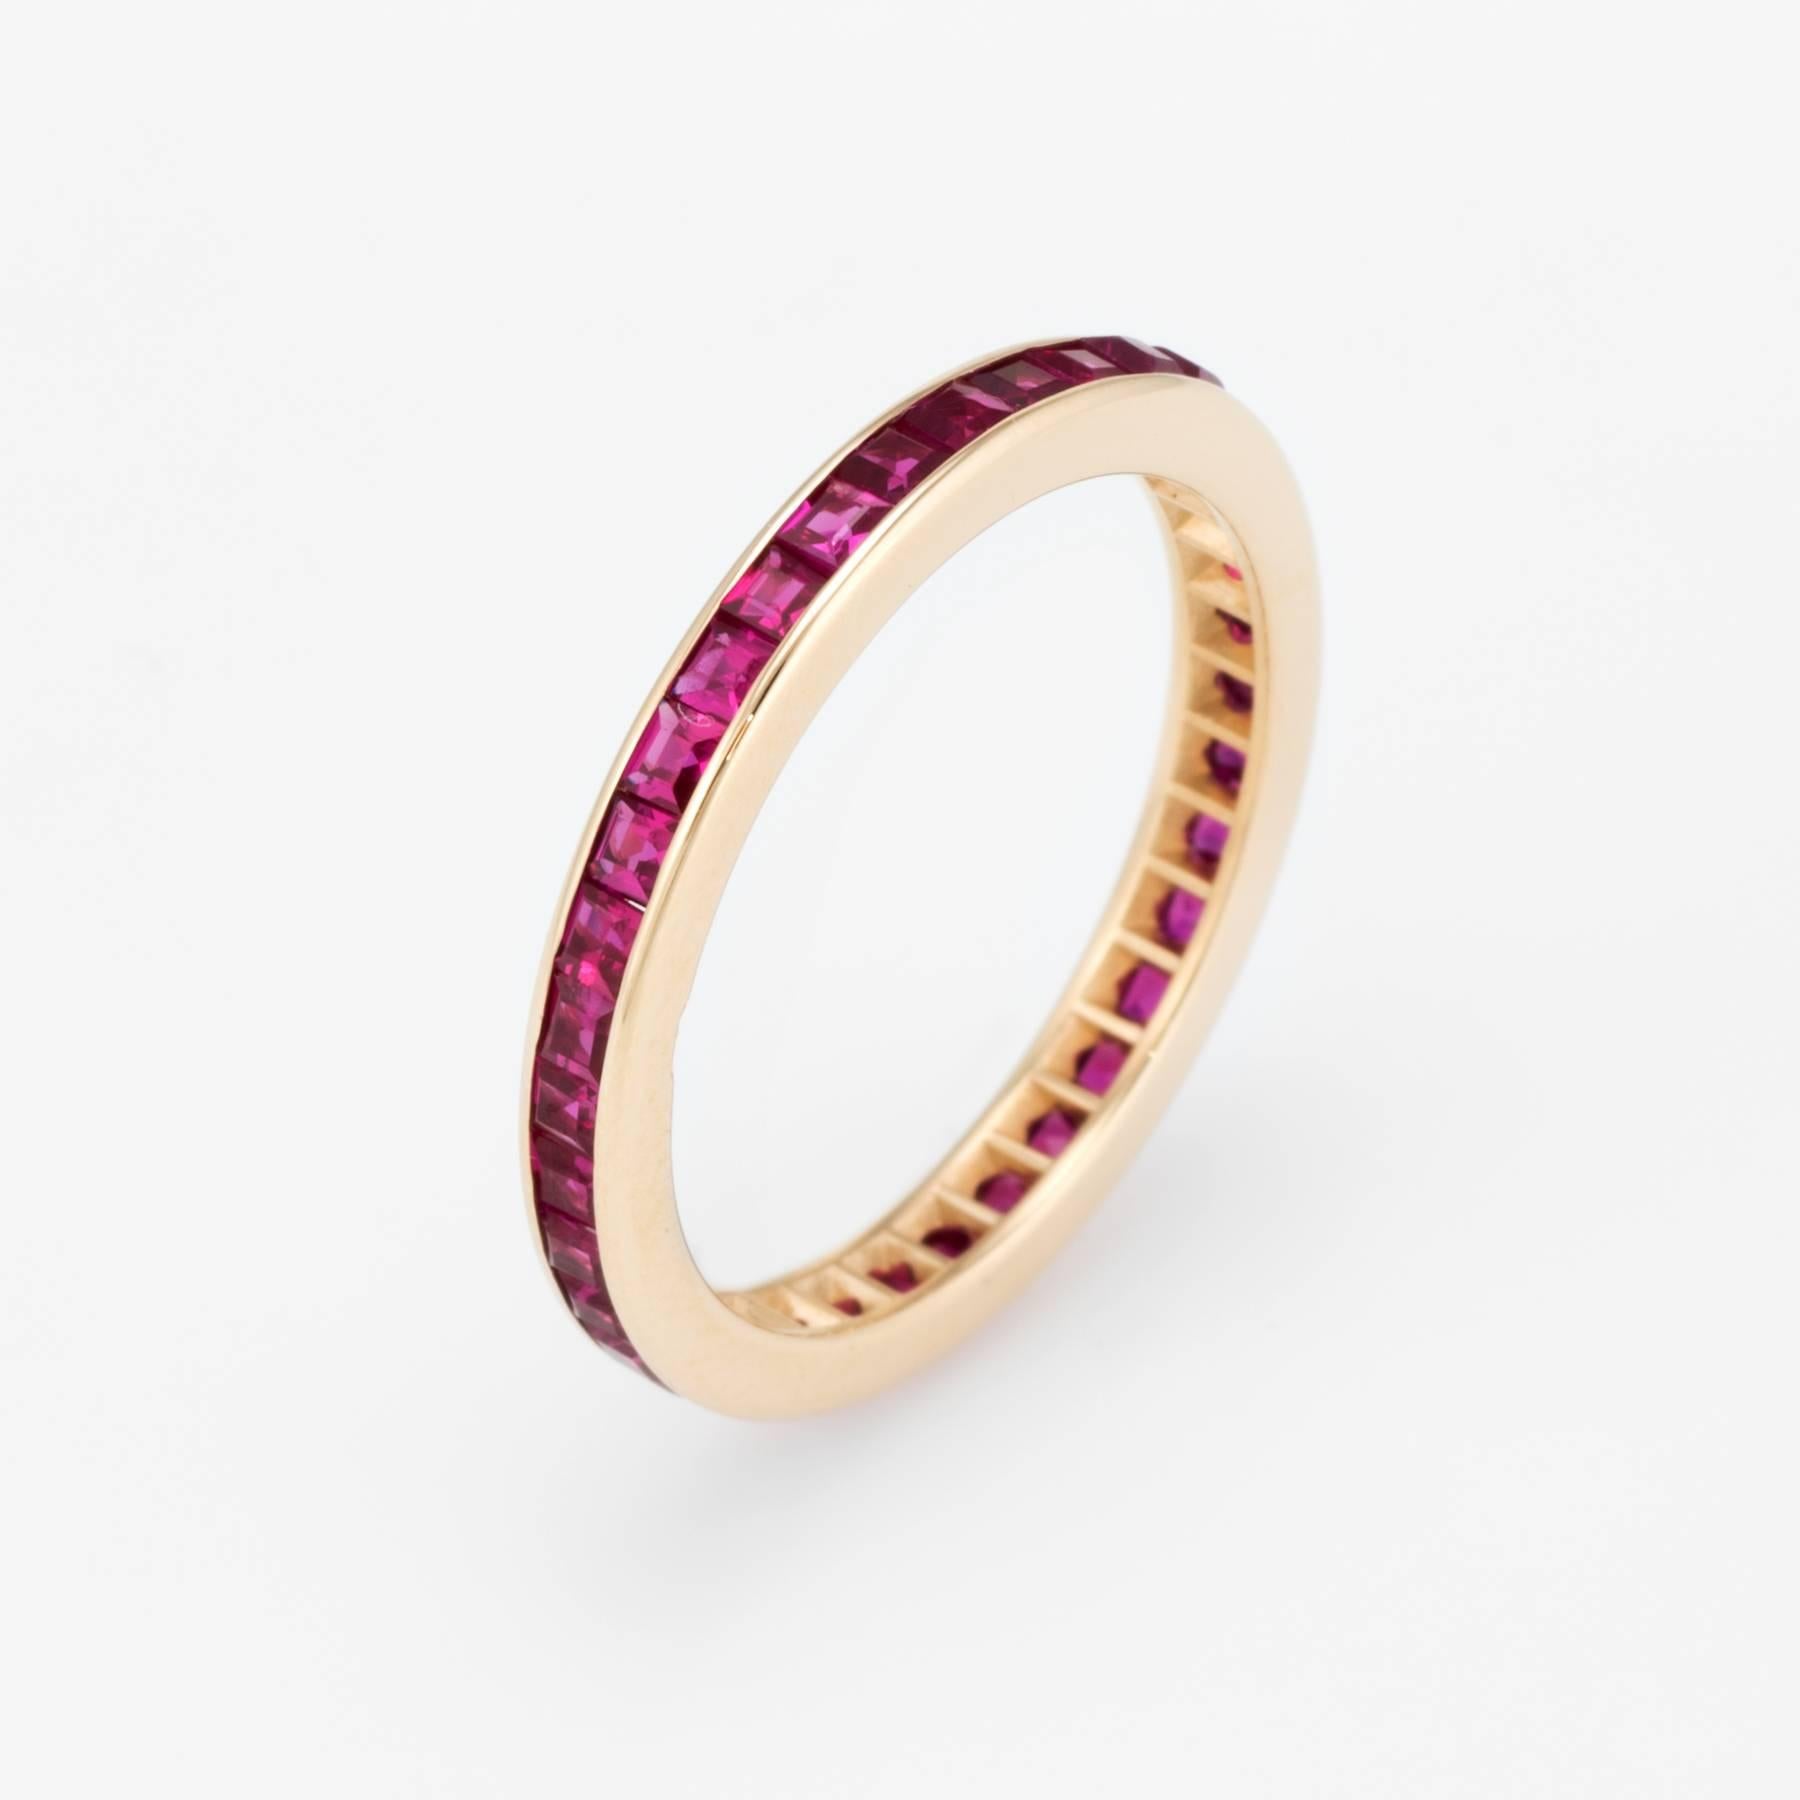 Elegant estate eternity ring, crafted in 14 karat yellow gold. 

Square cut rubies are estimated at 0.03 carats each and total an estimated 1.11 carats. The rubies are in excellent condition and free of cracks or chips.   

The ring is in excellent